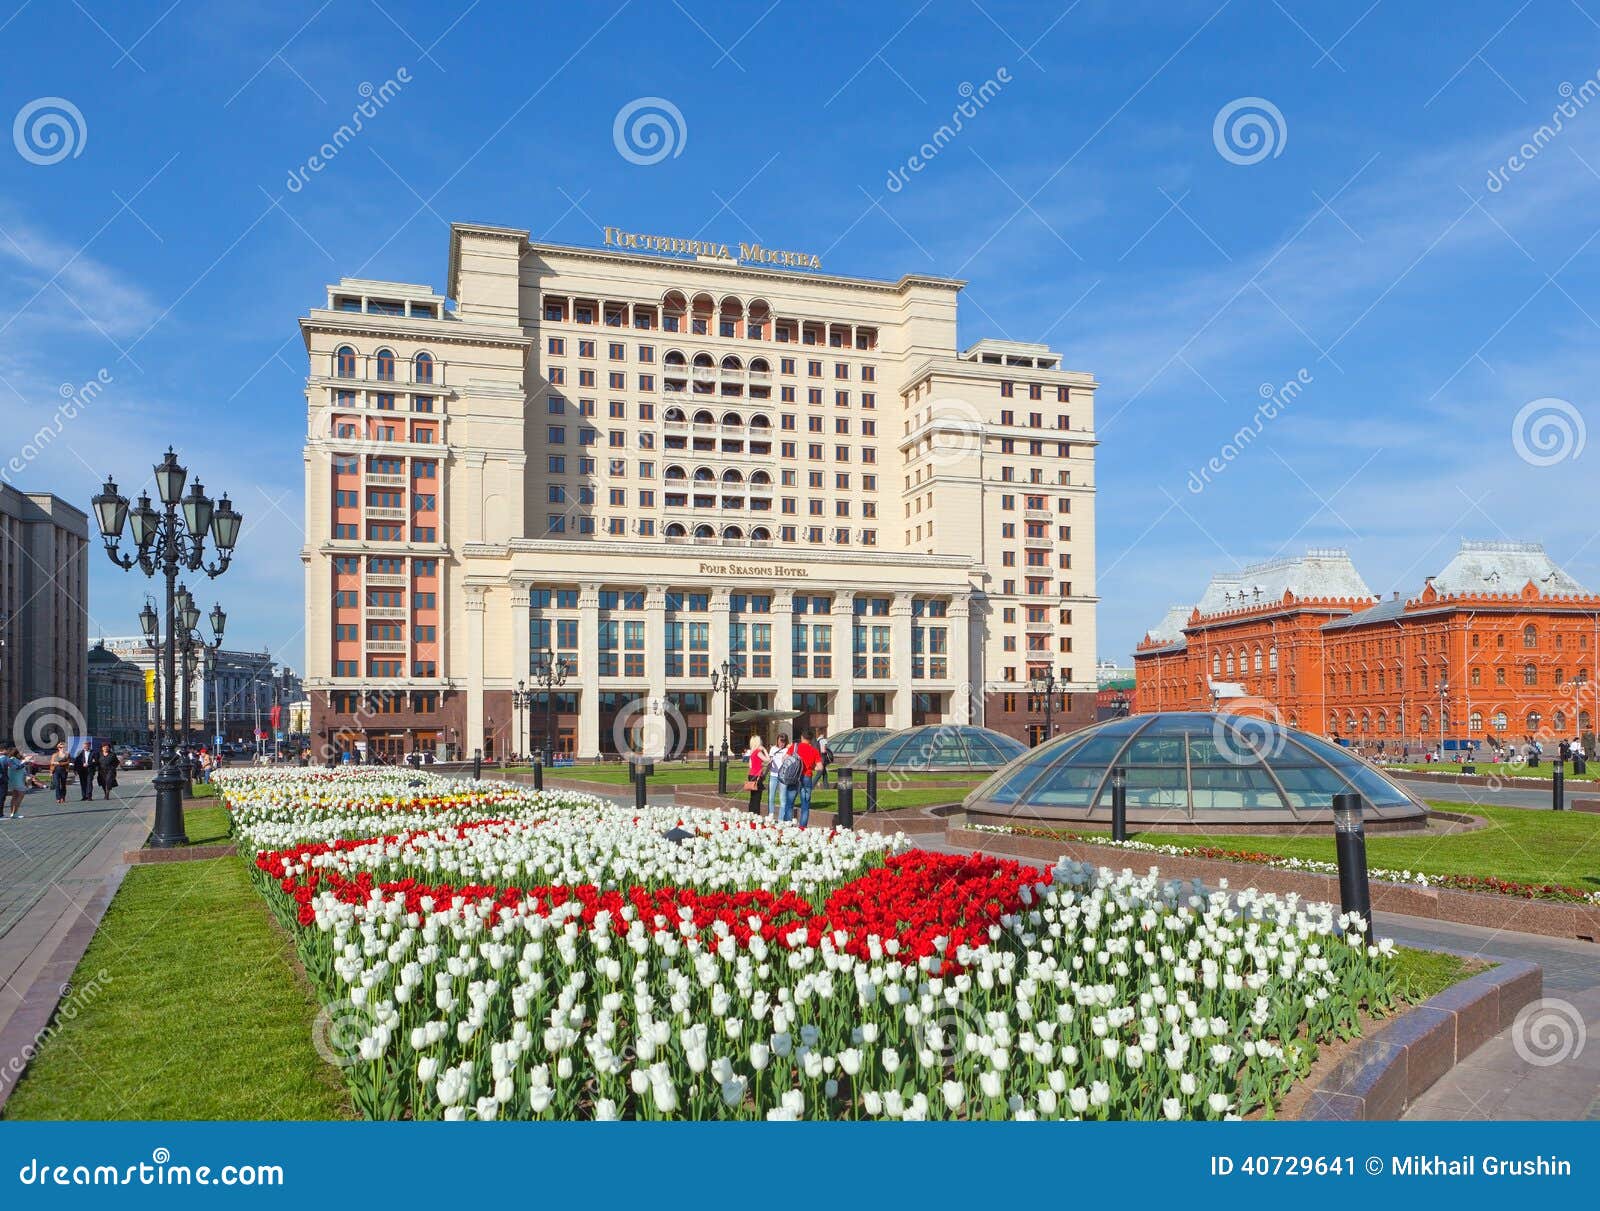 four seasons hotel moscow tulips lawn may building manezh square may foreground 40729641